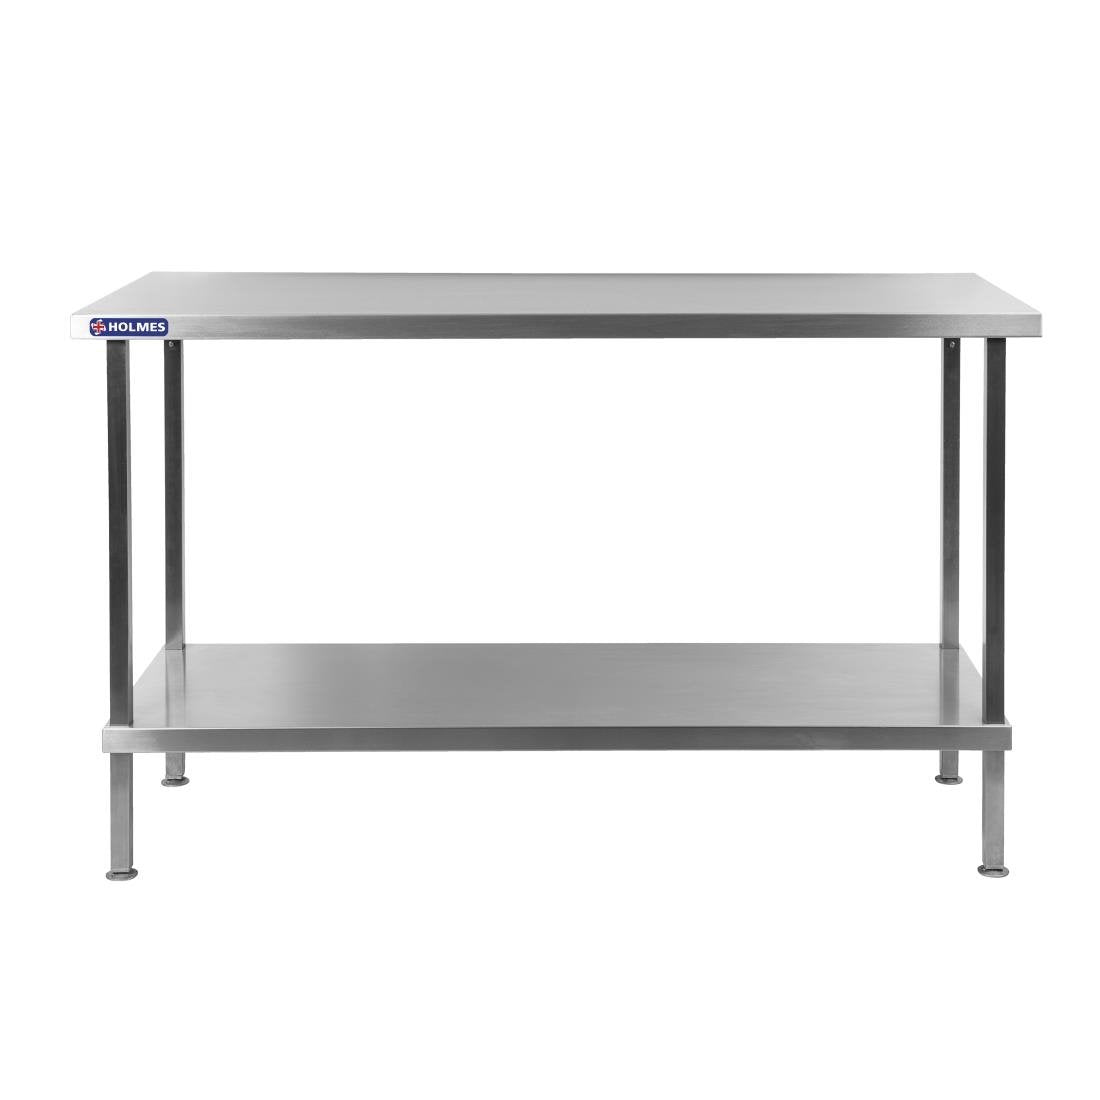 DR053 Holmes Stainless Steel Centre Table 2100mm JD Catering Equipment Solutions Ltd